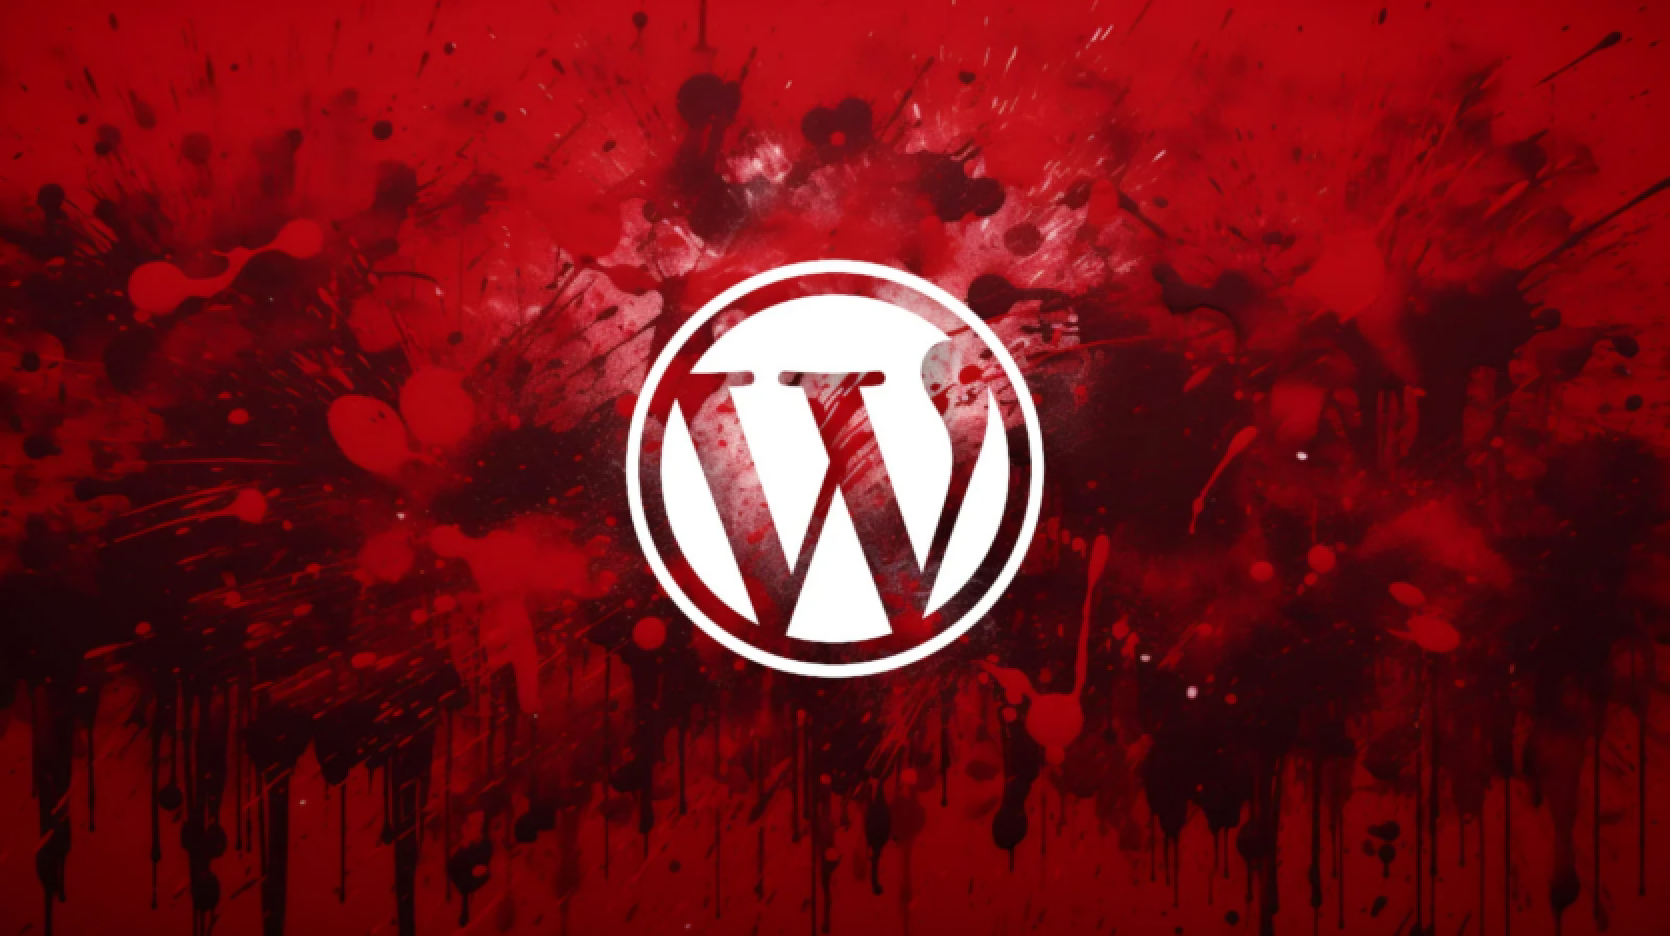 Hackers exploited a vulnerability in the WordPress plugin Popup Builder to infect 3,300 websites